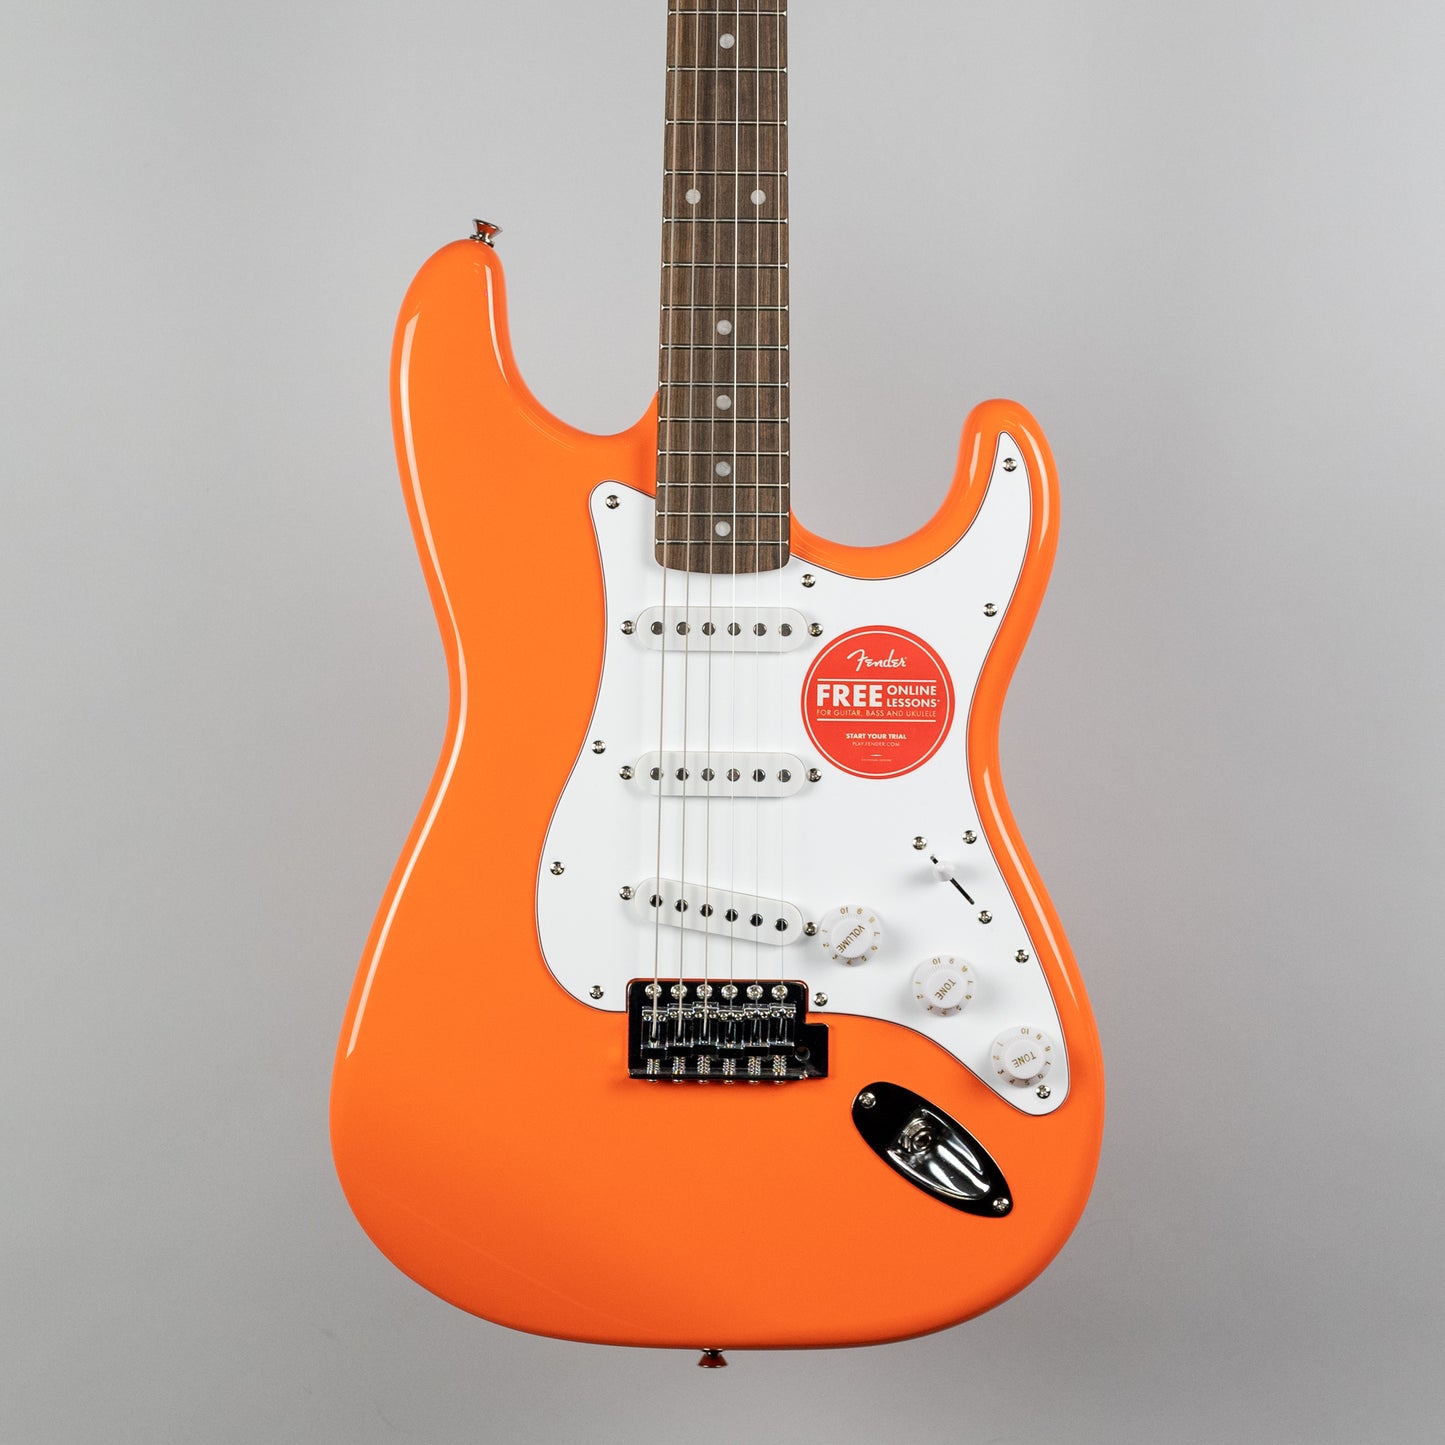 Squier Affinity Series Stratocaster in Competition Orange